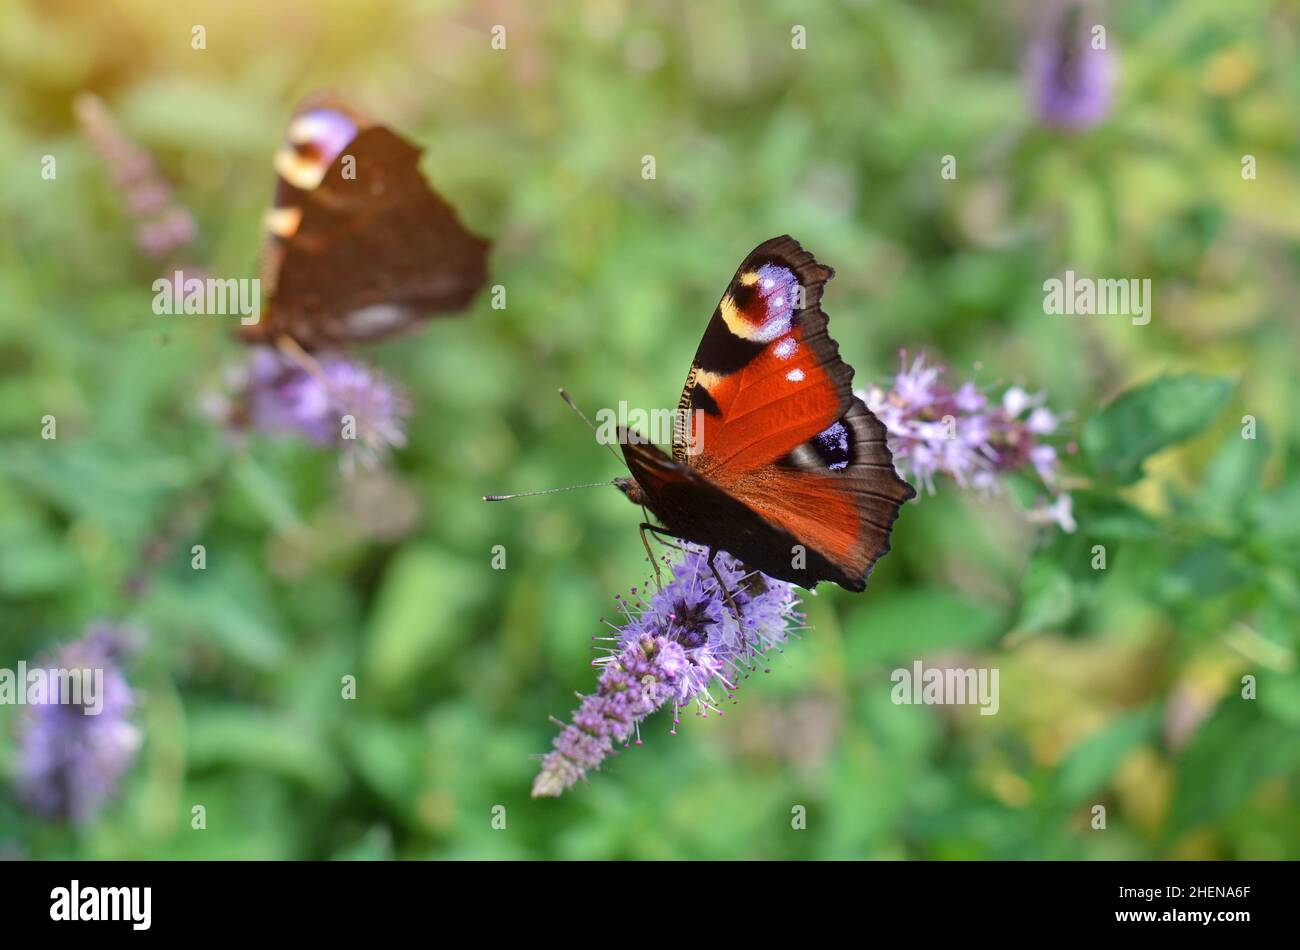 Colorful peacock butterfly, also called the European peacock or Aglais io, in its natural habitat collects nectar on a flower on a summer day. Stock Photo